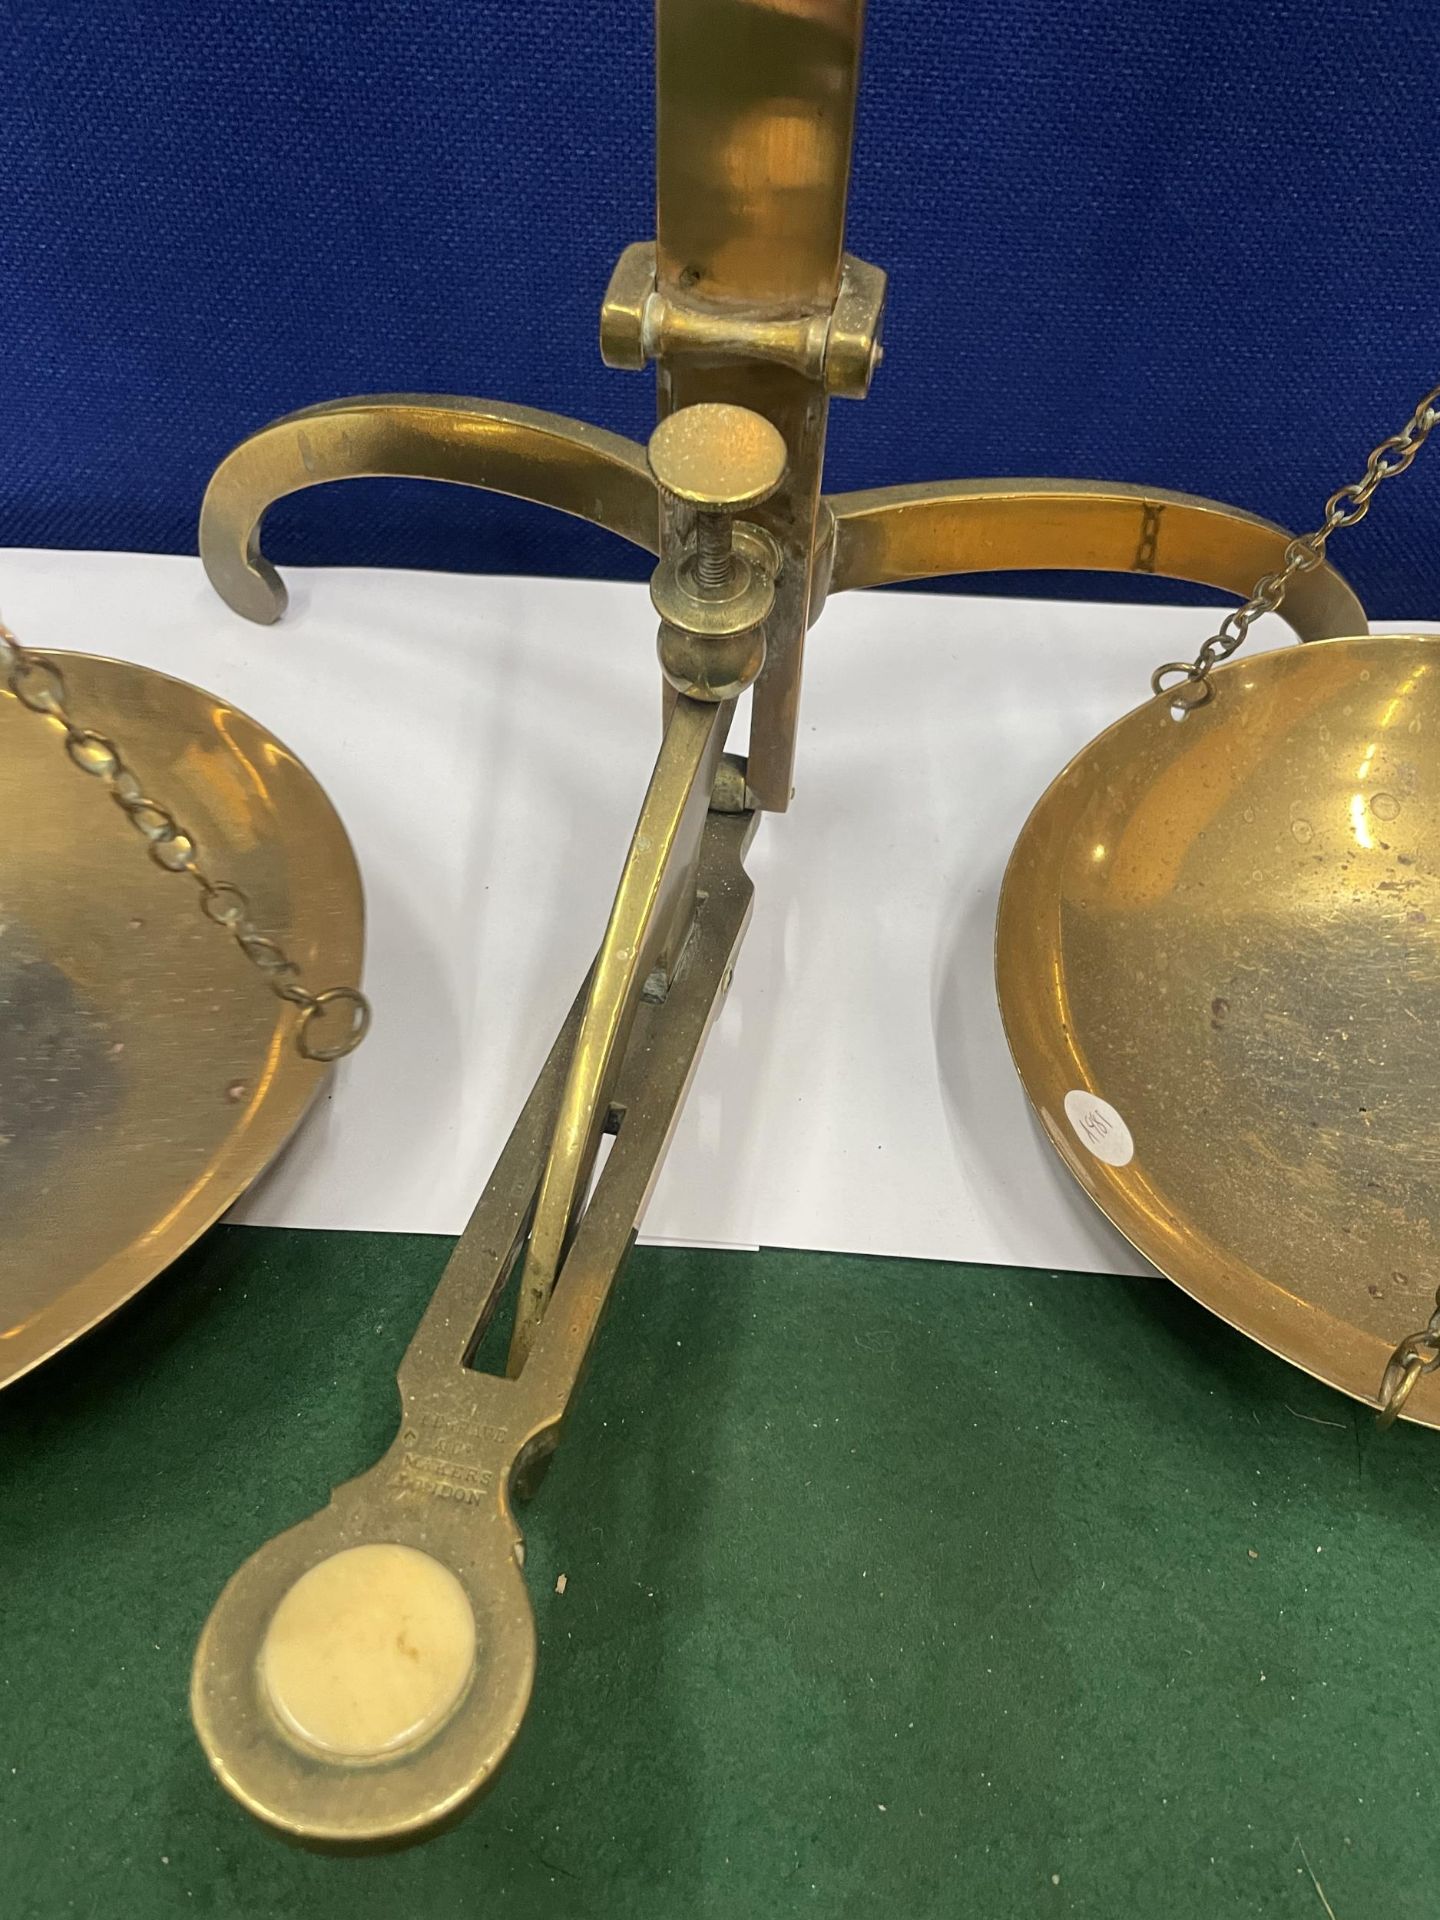 A PAIR OF VINTAGE BRASS BALANCE SCALES - Image 2 of 4